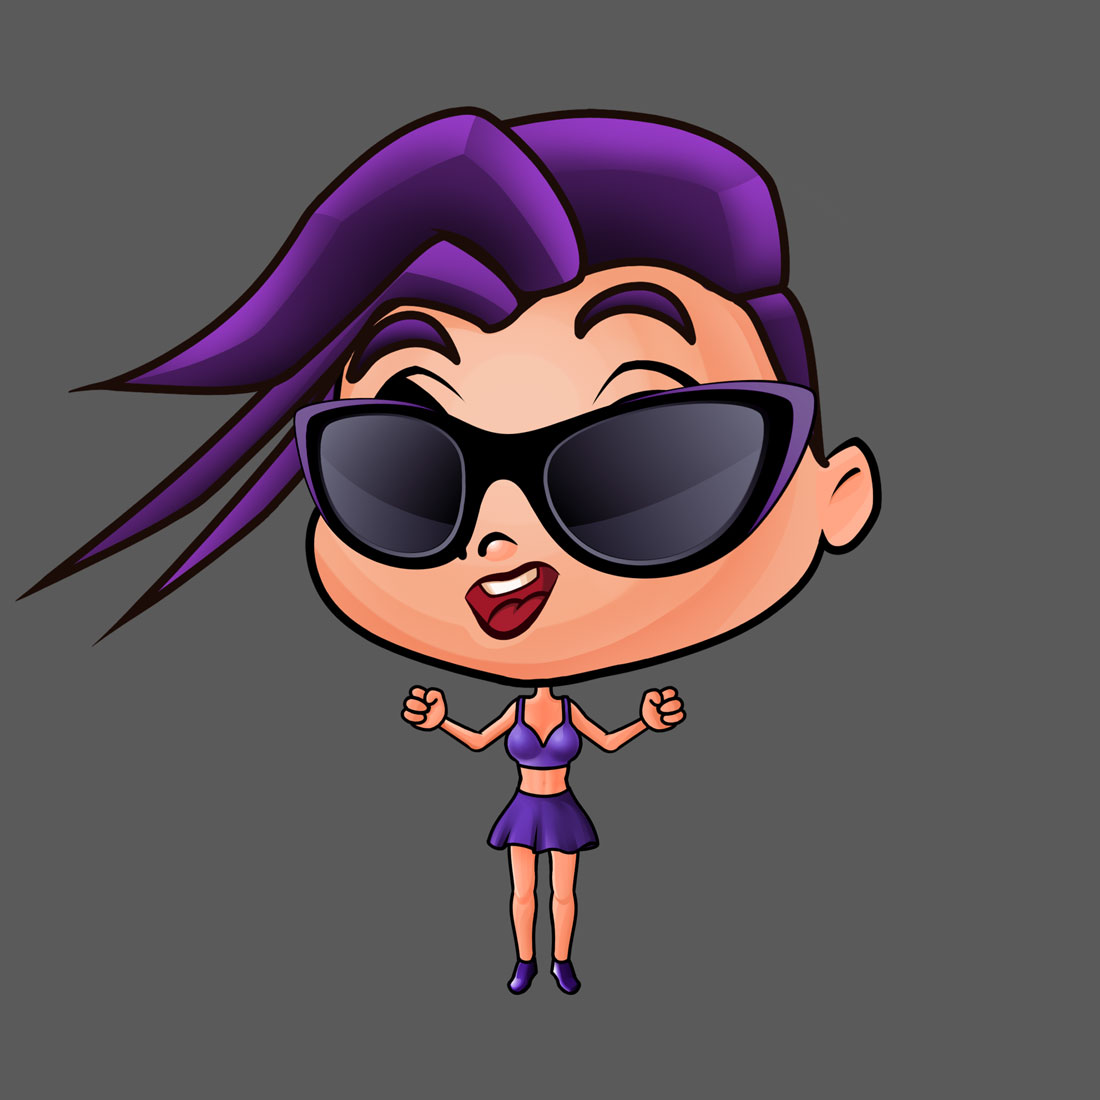 Girl with purple hair - 2D mobile game character design